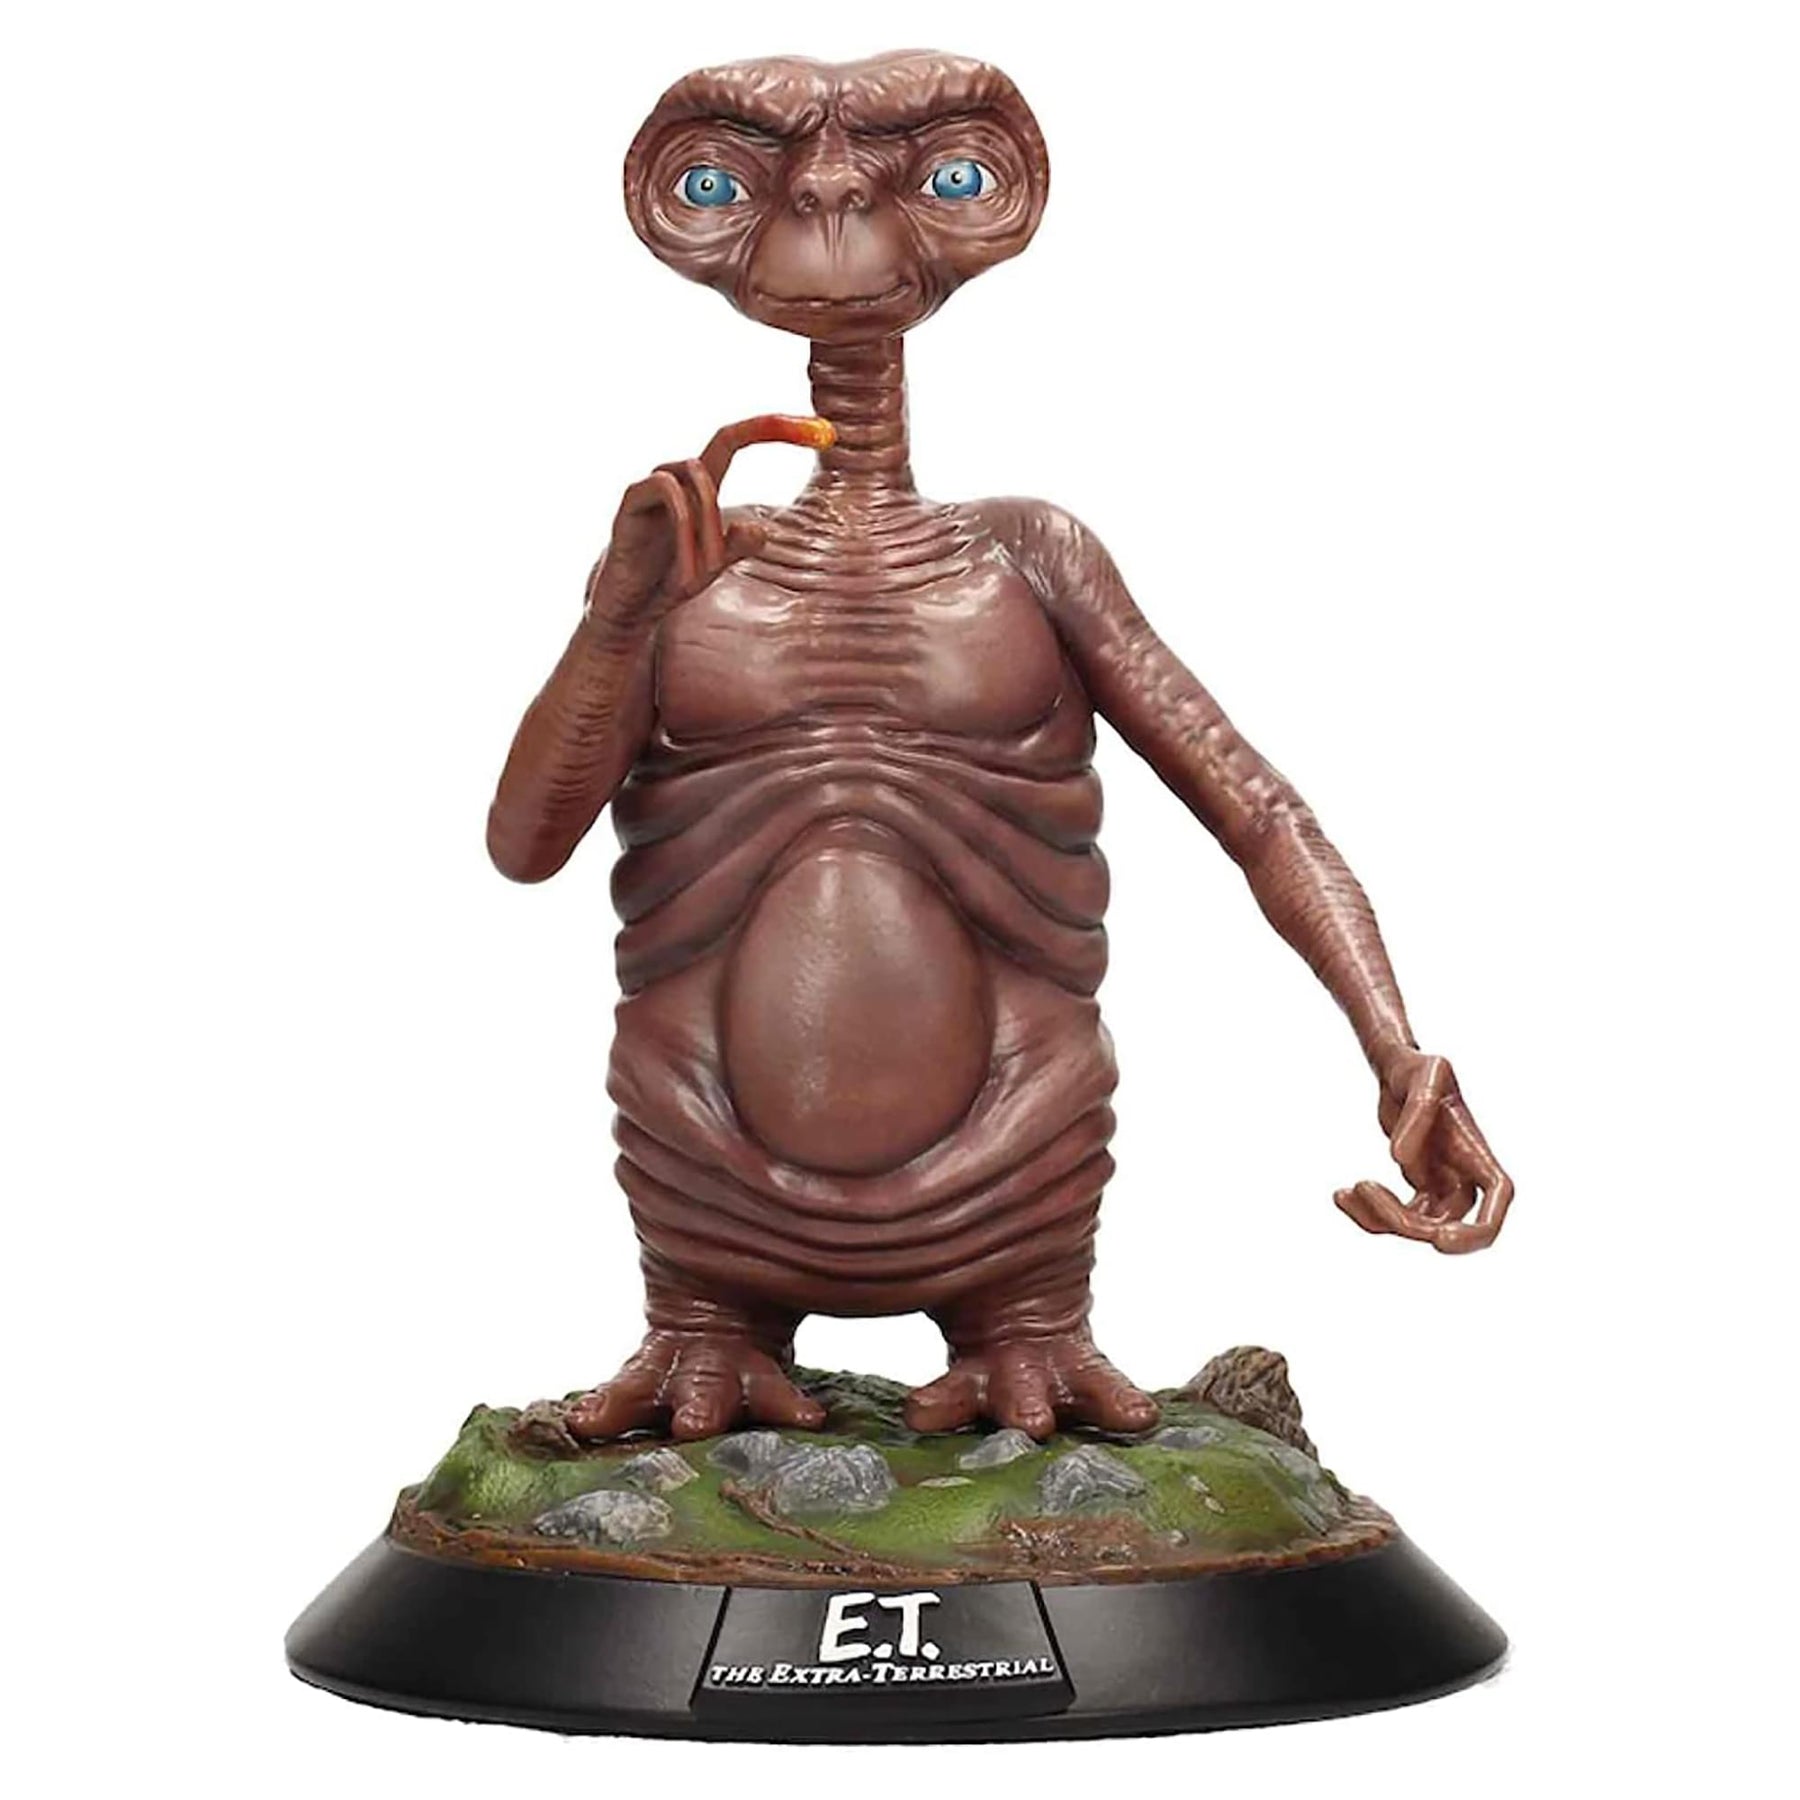 E.T. The Extra-Terrestrial 8.5 Inch Resin Statue